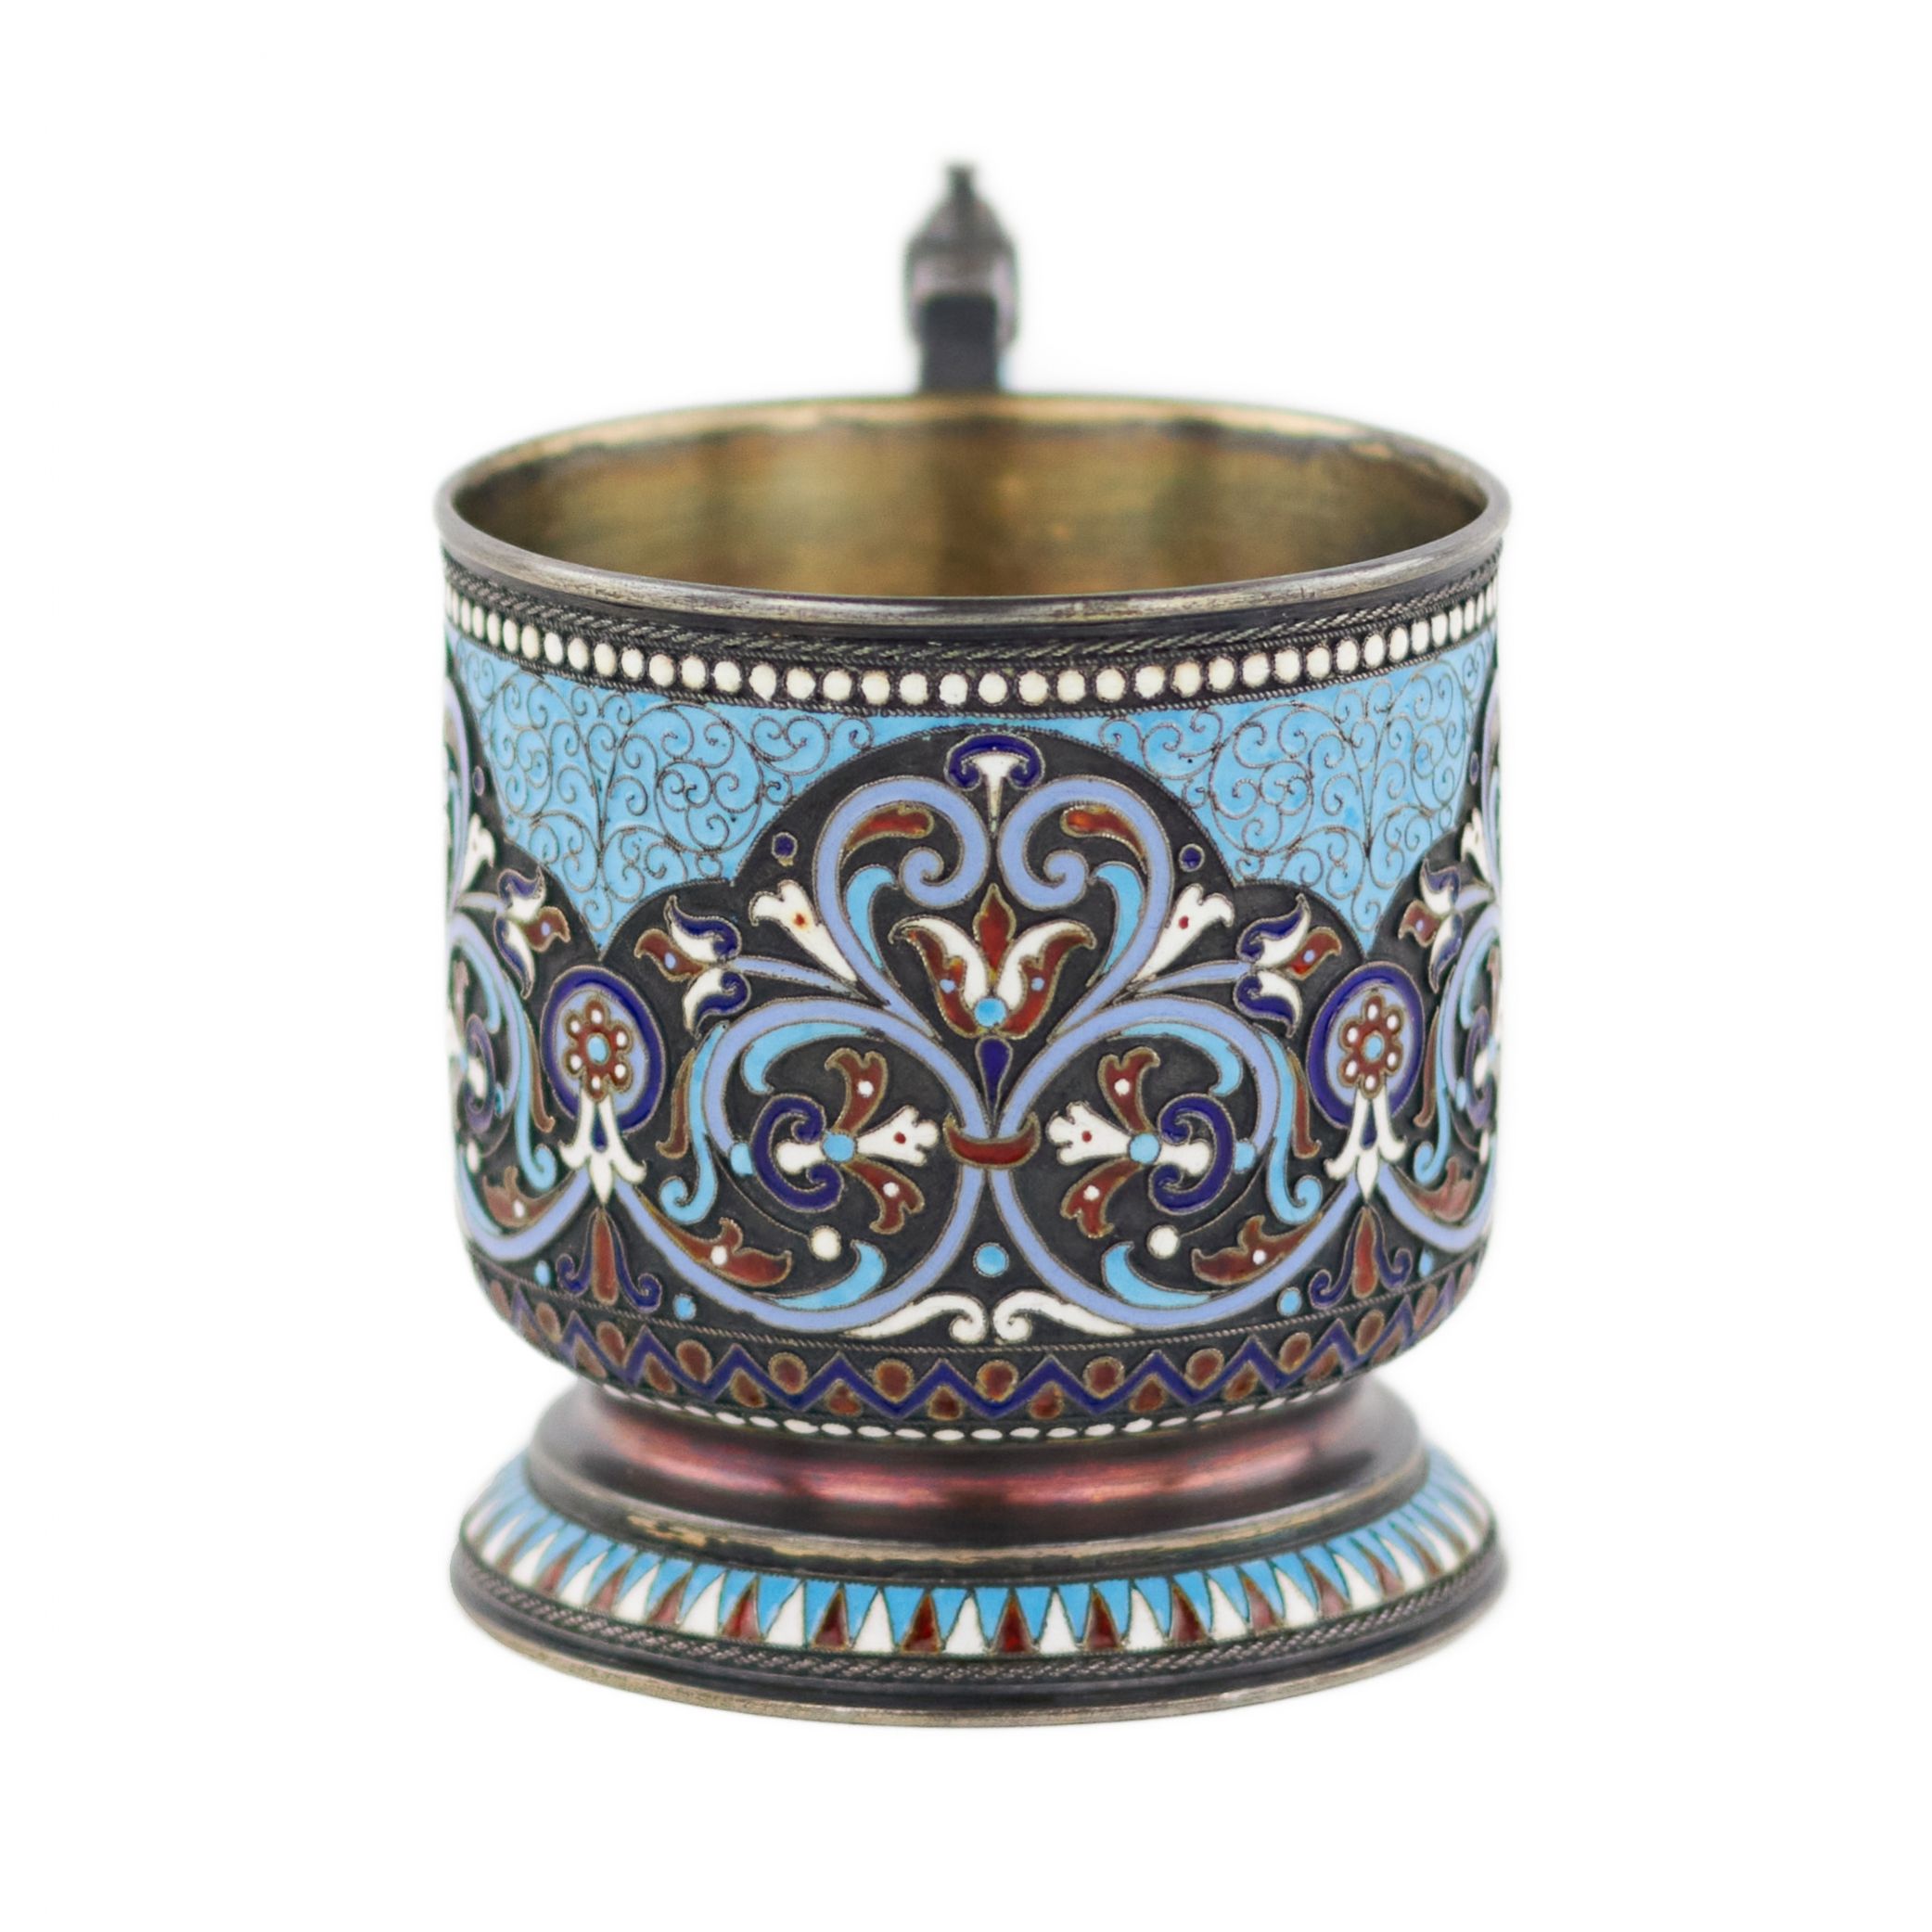 Nikolay ALEXEEV, silver cloisonne enamel glass holder in neo-Russian style. 1895 - Image 5 of 9